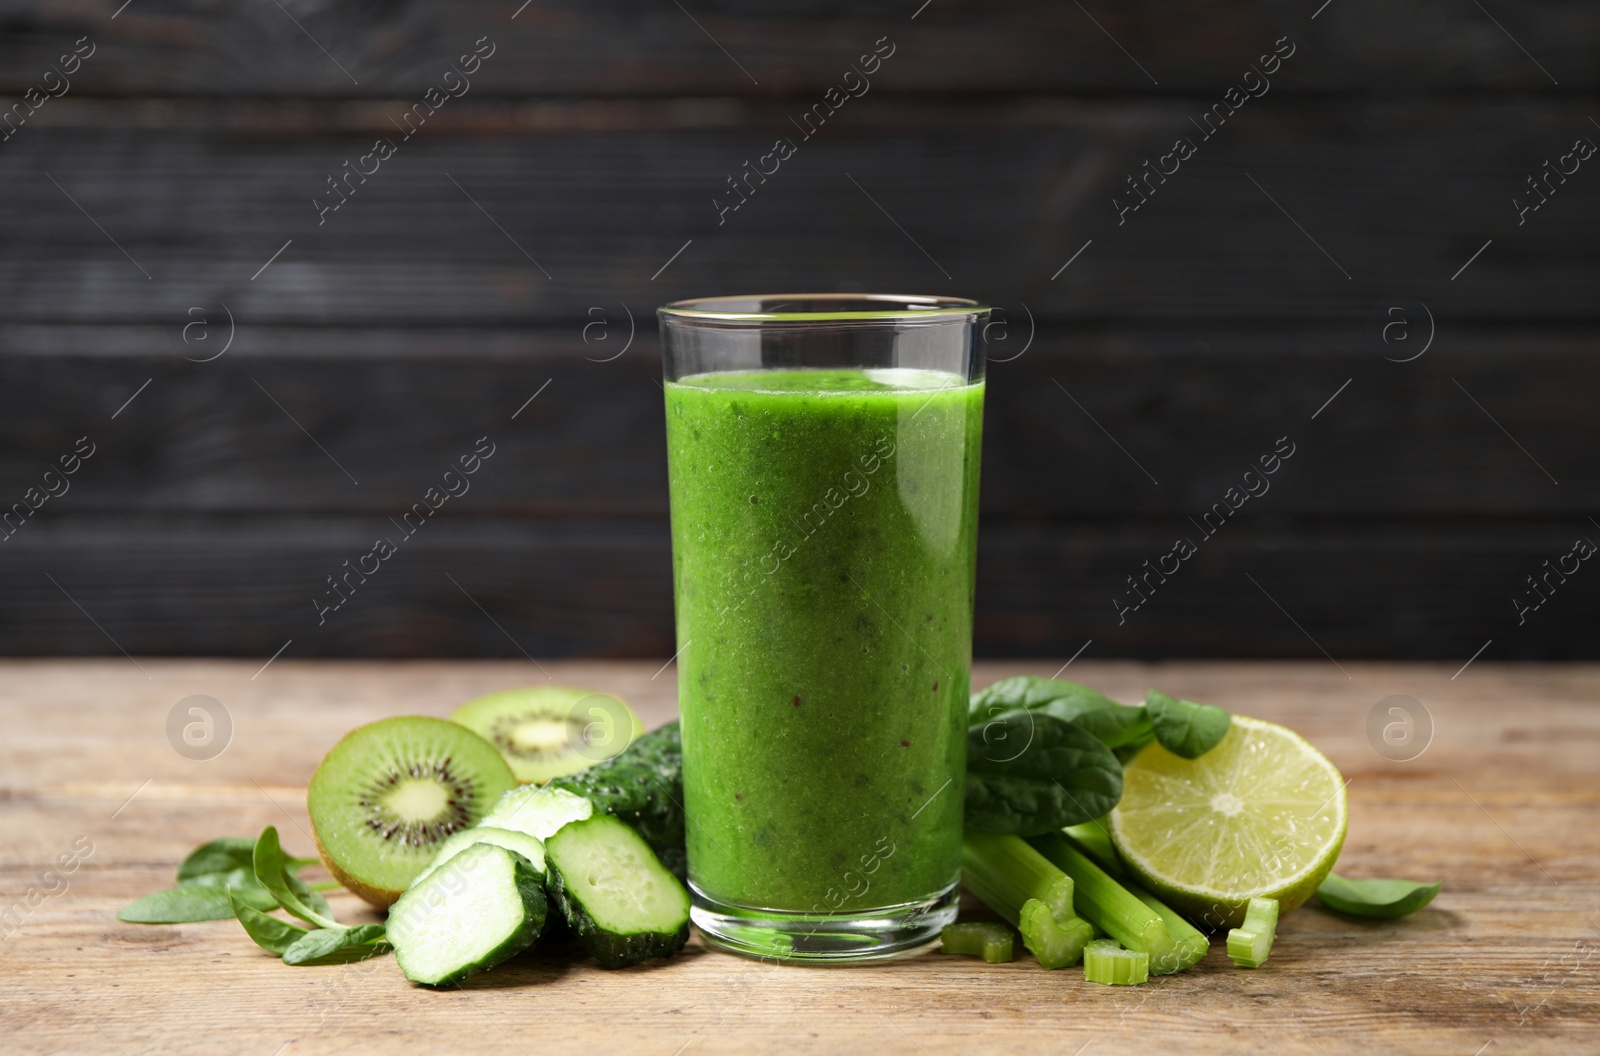 Photo of Delicious green juice and fresh ingredients on wooden table against black background